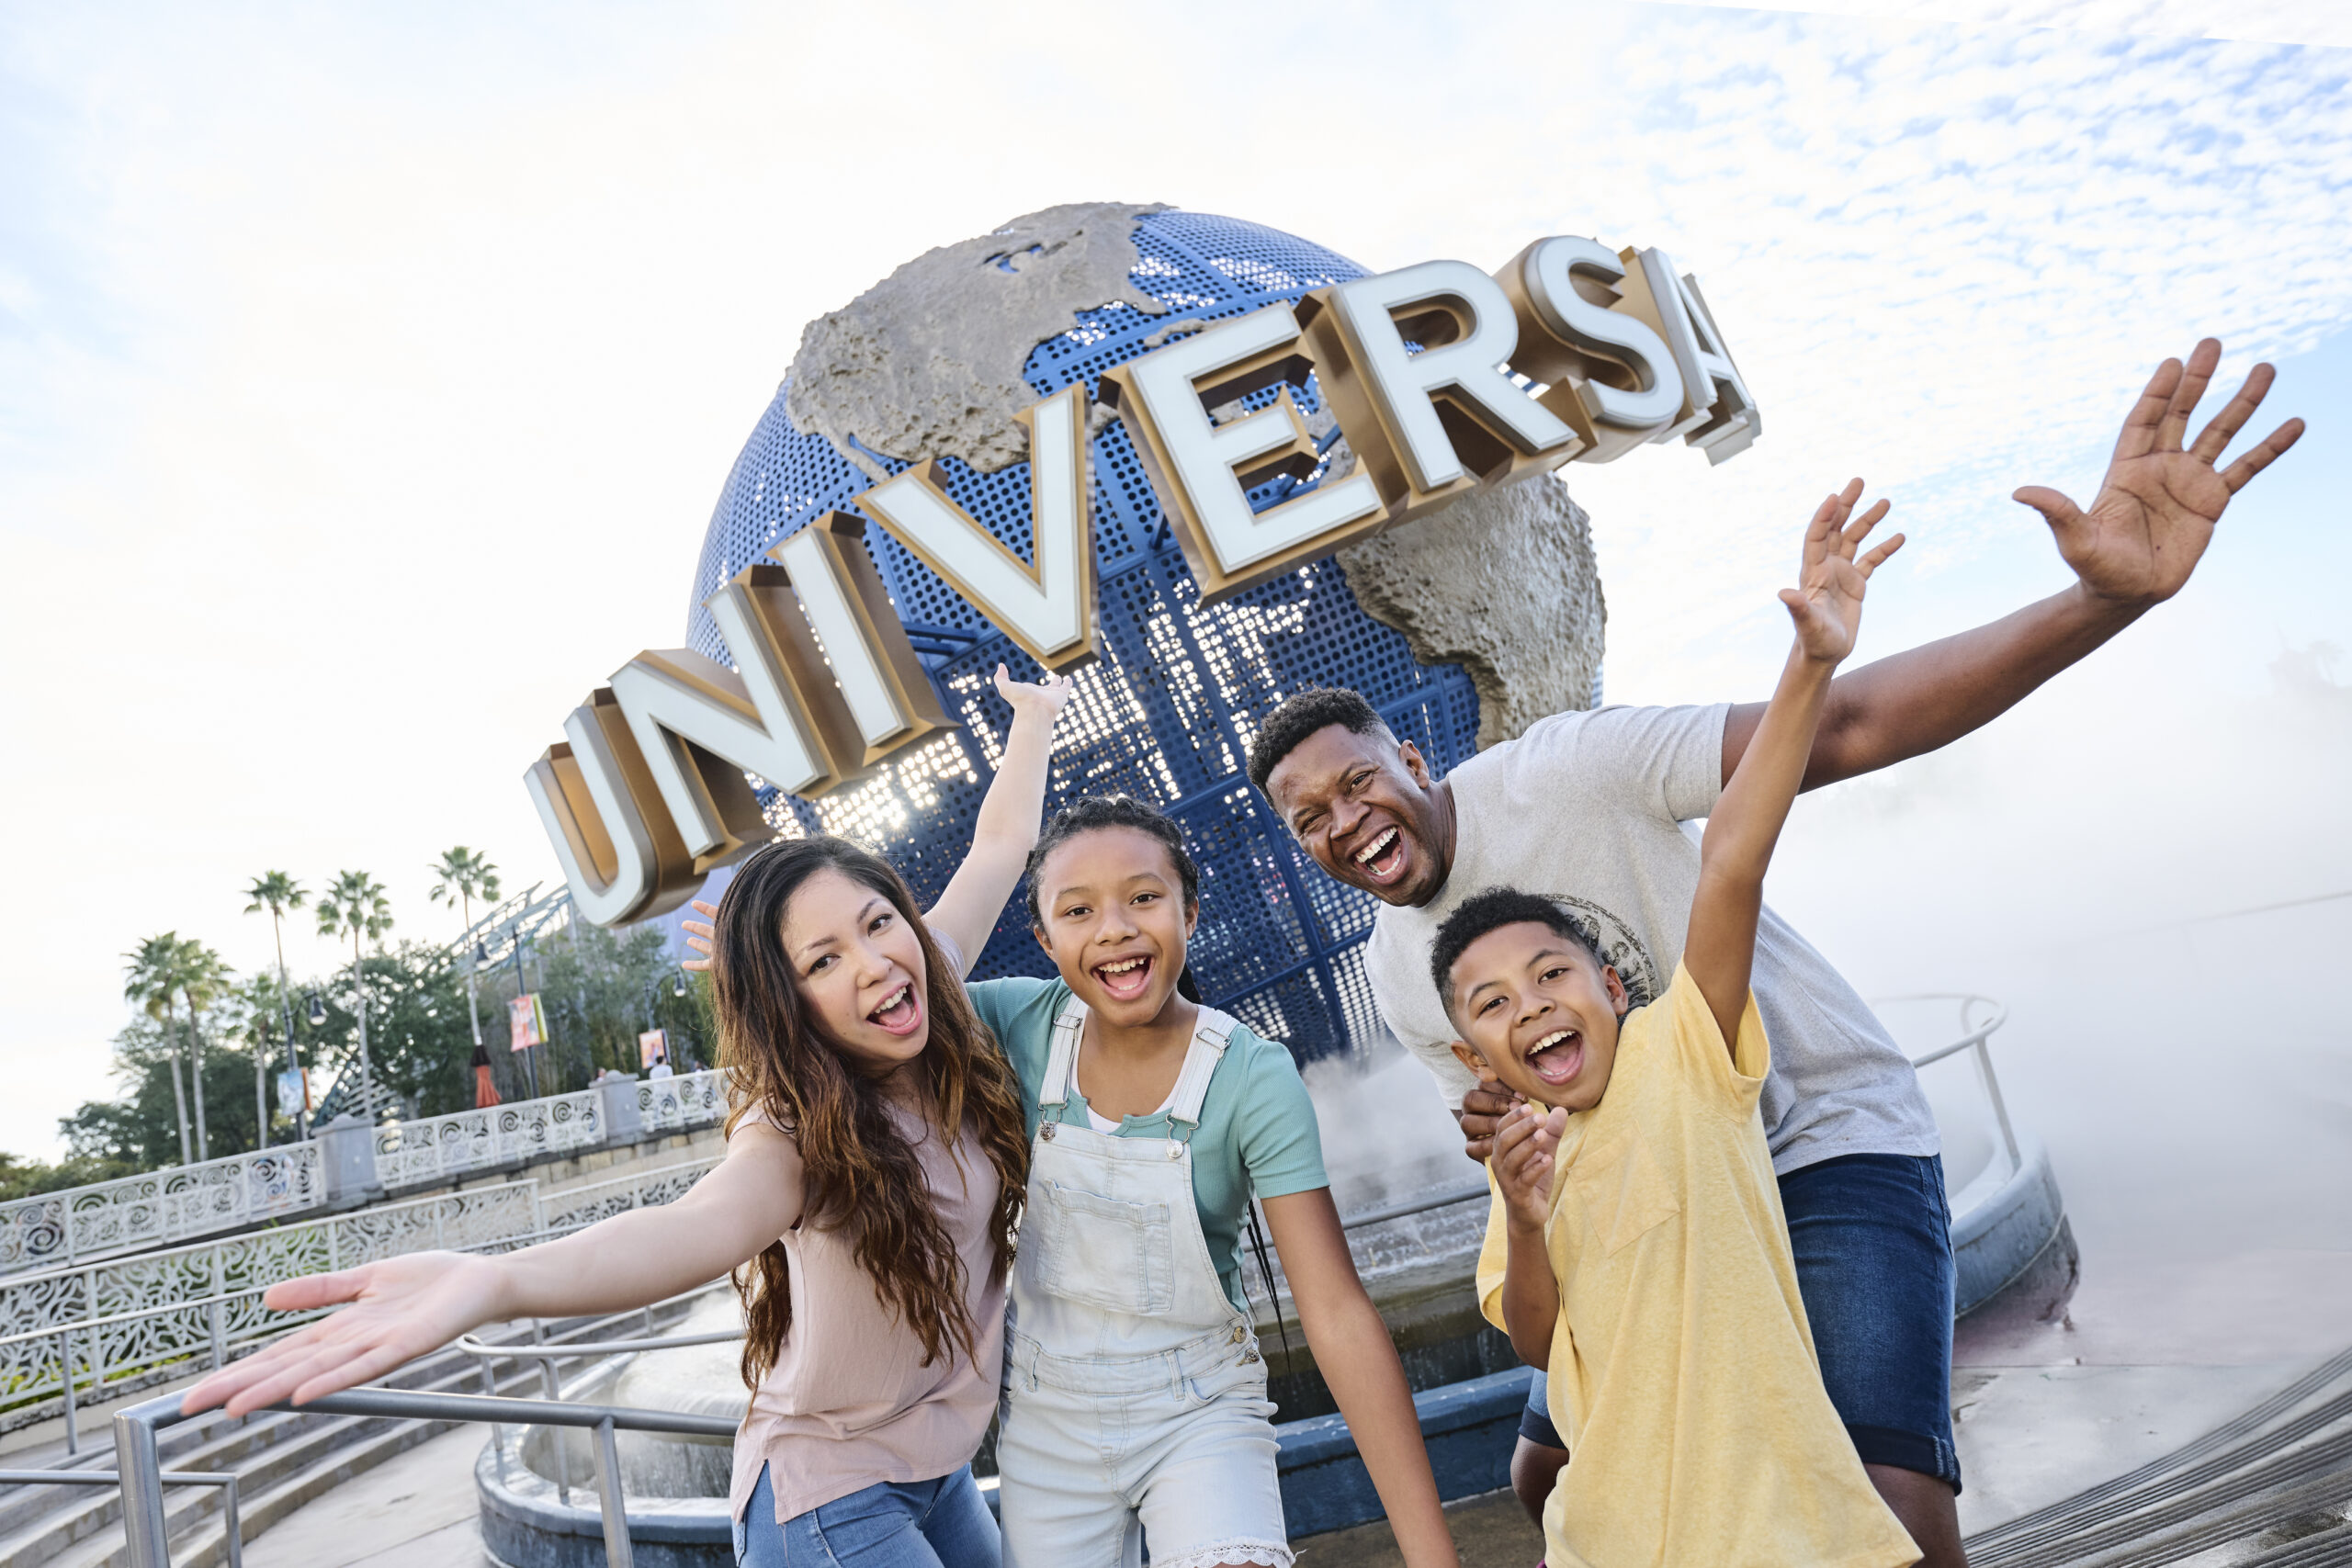 a family of 4 stands in a laughing pose with arms outstretched in front of the Universal Globe